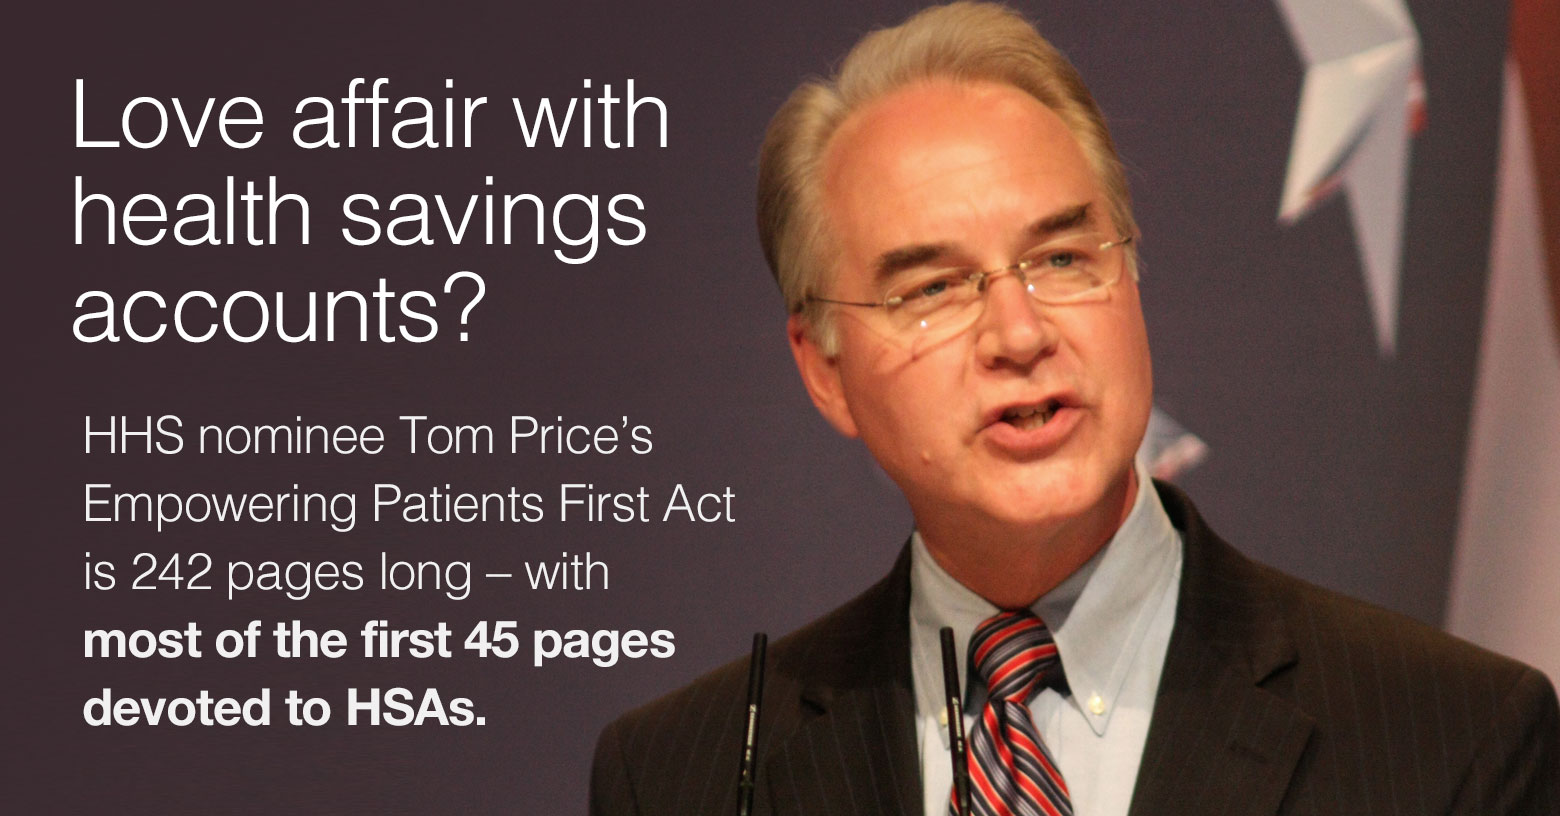 HHS's Tom Price and HSAs.